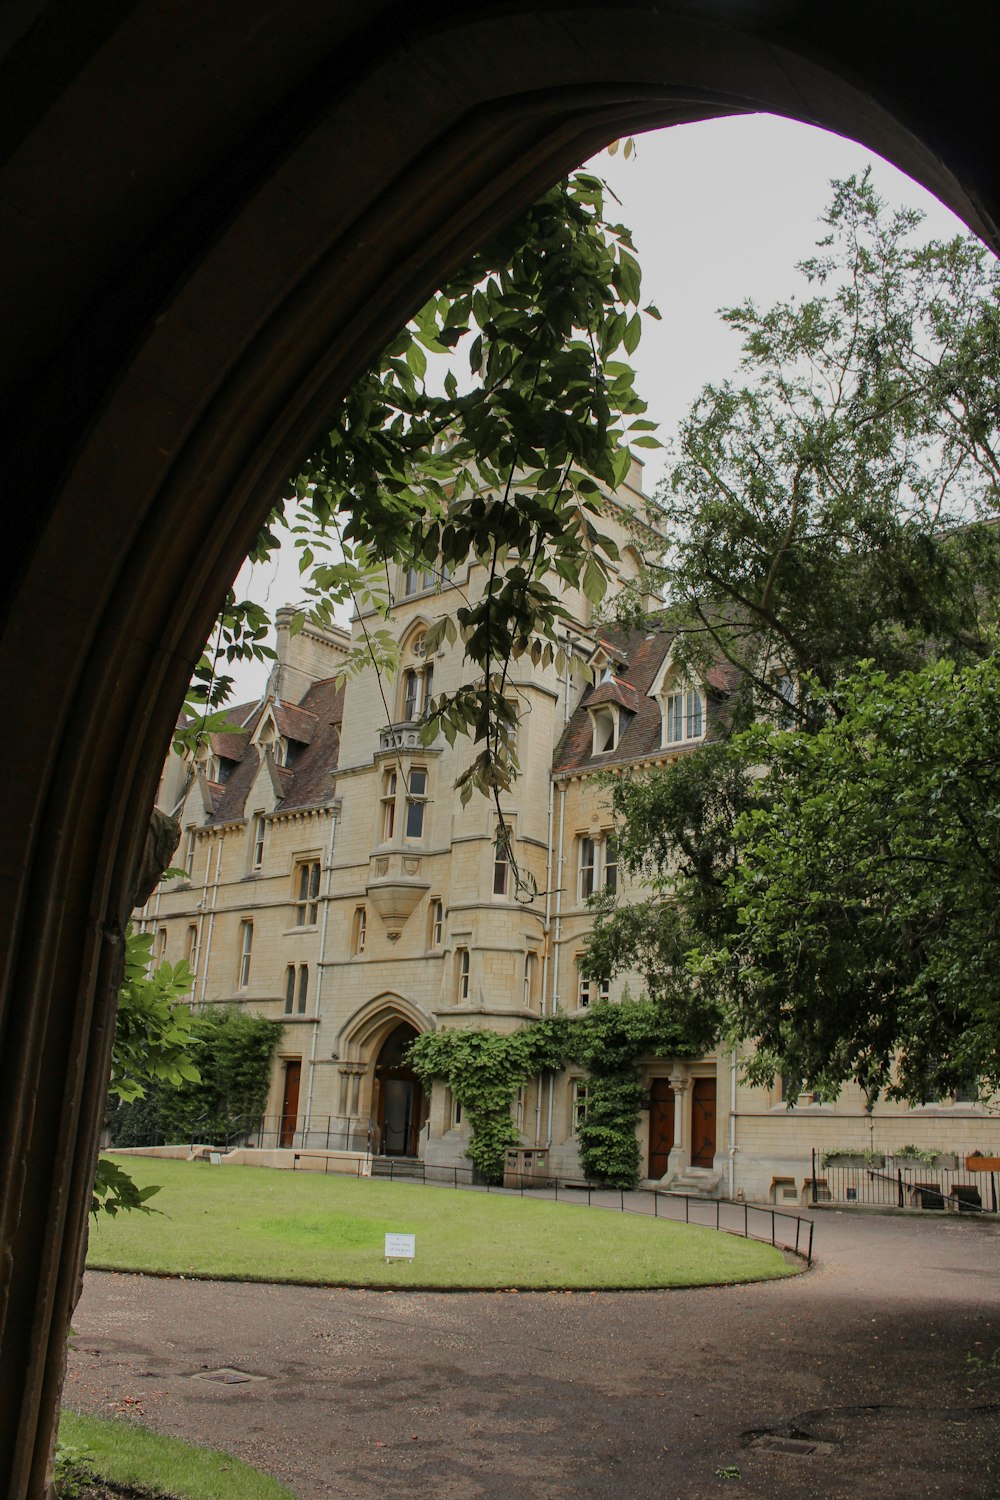 a view of a large building through an arch